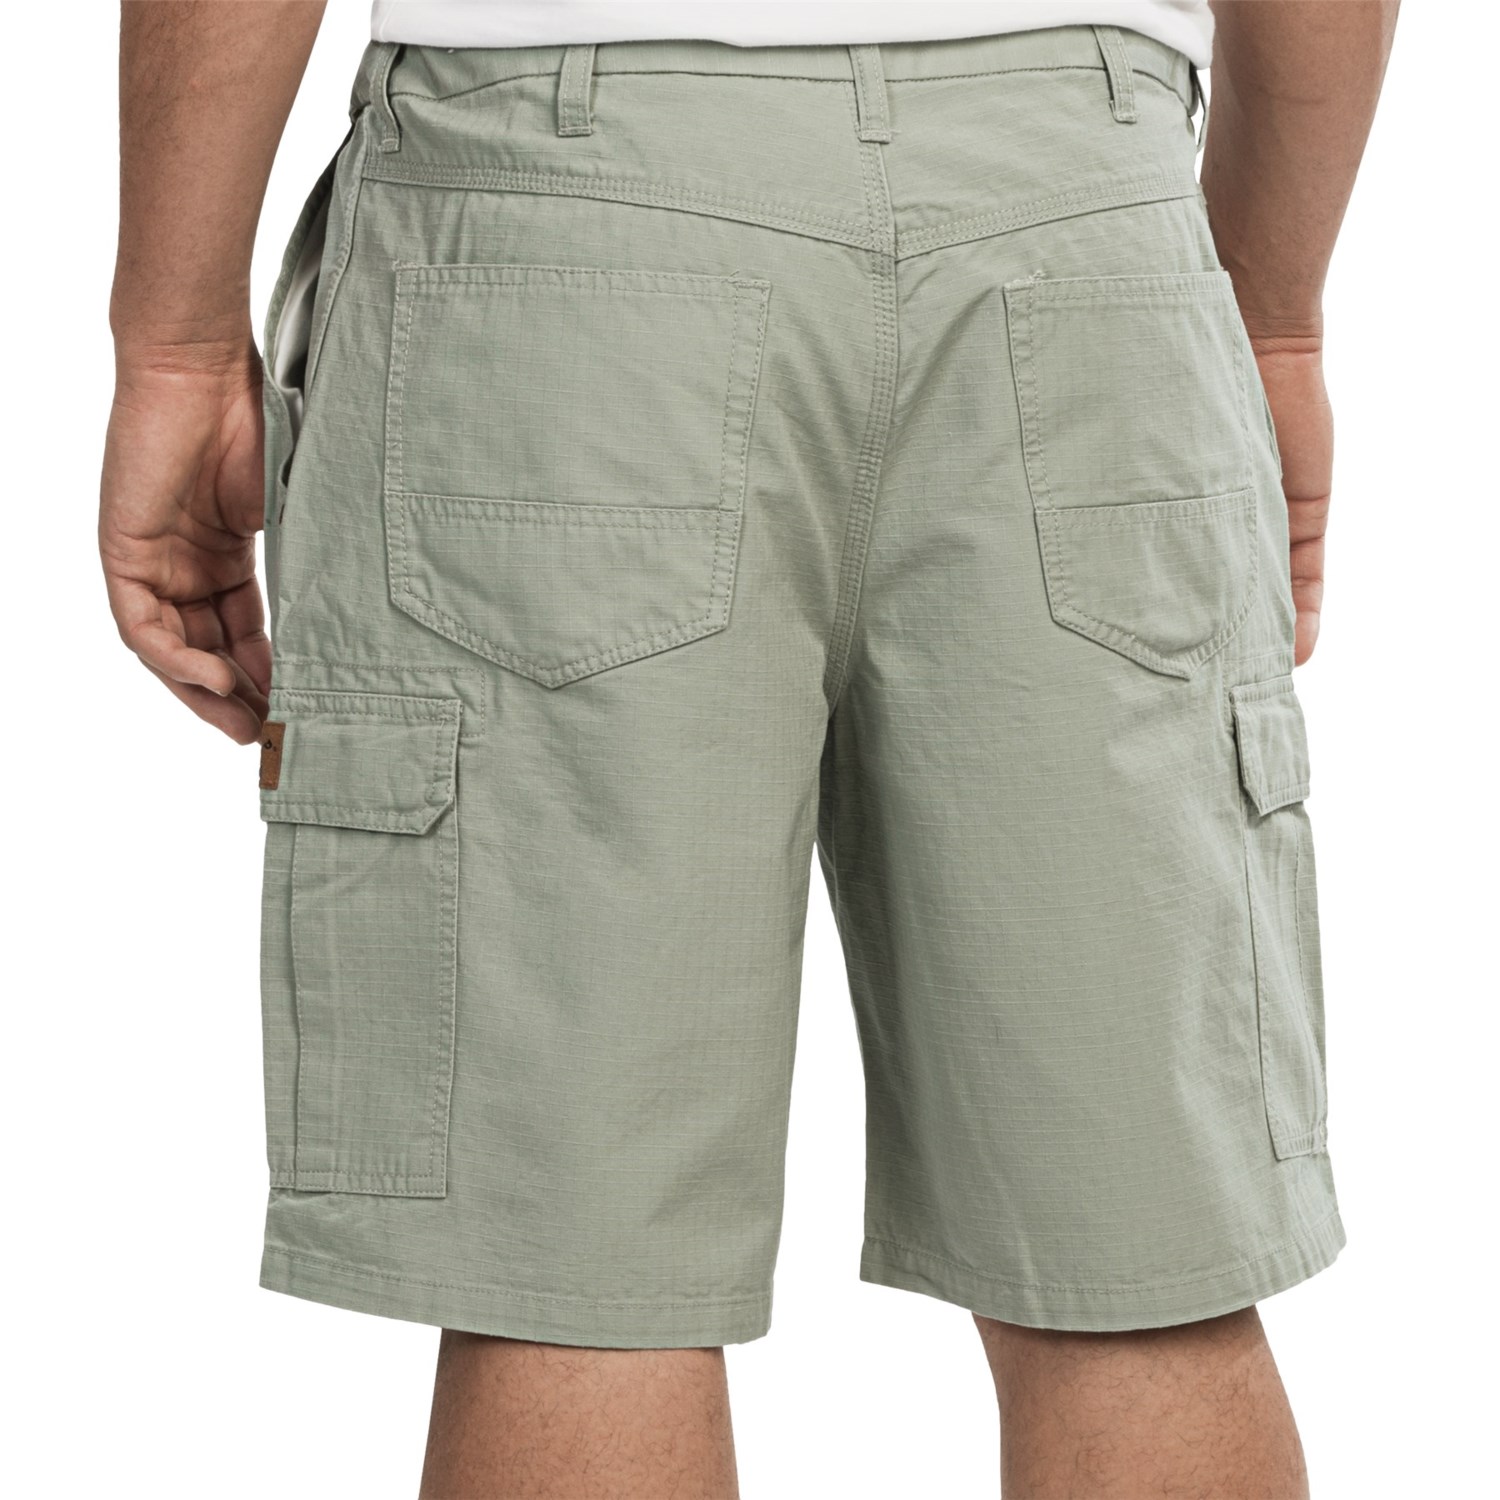 Walls Workwear Cargo Shorts (For Men) 7539D - Save 57%